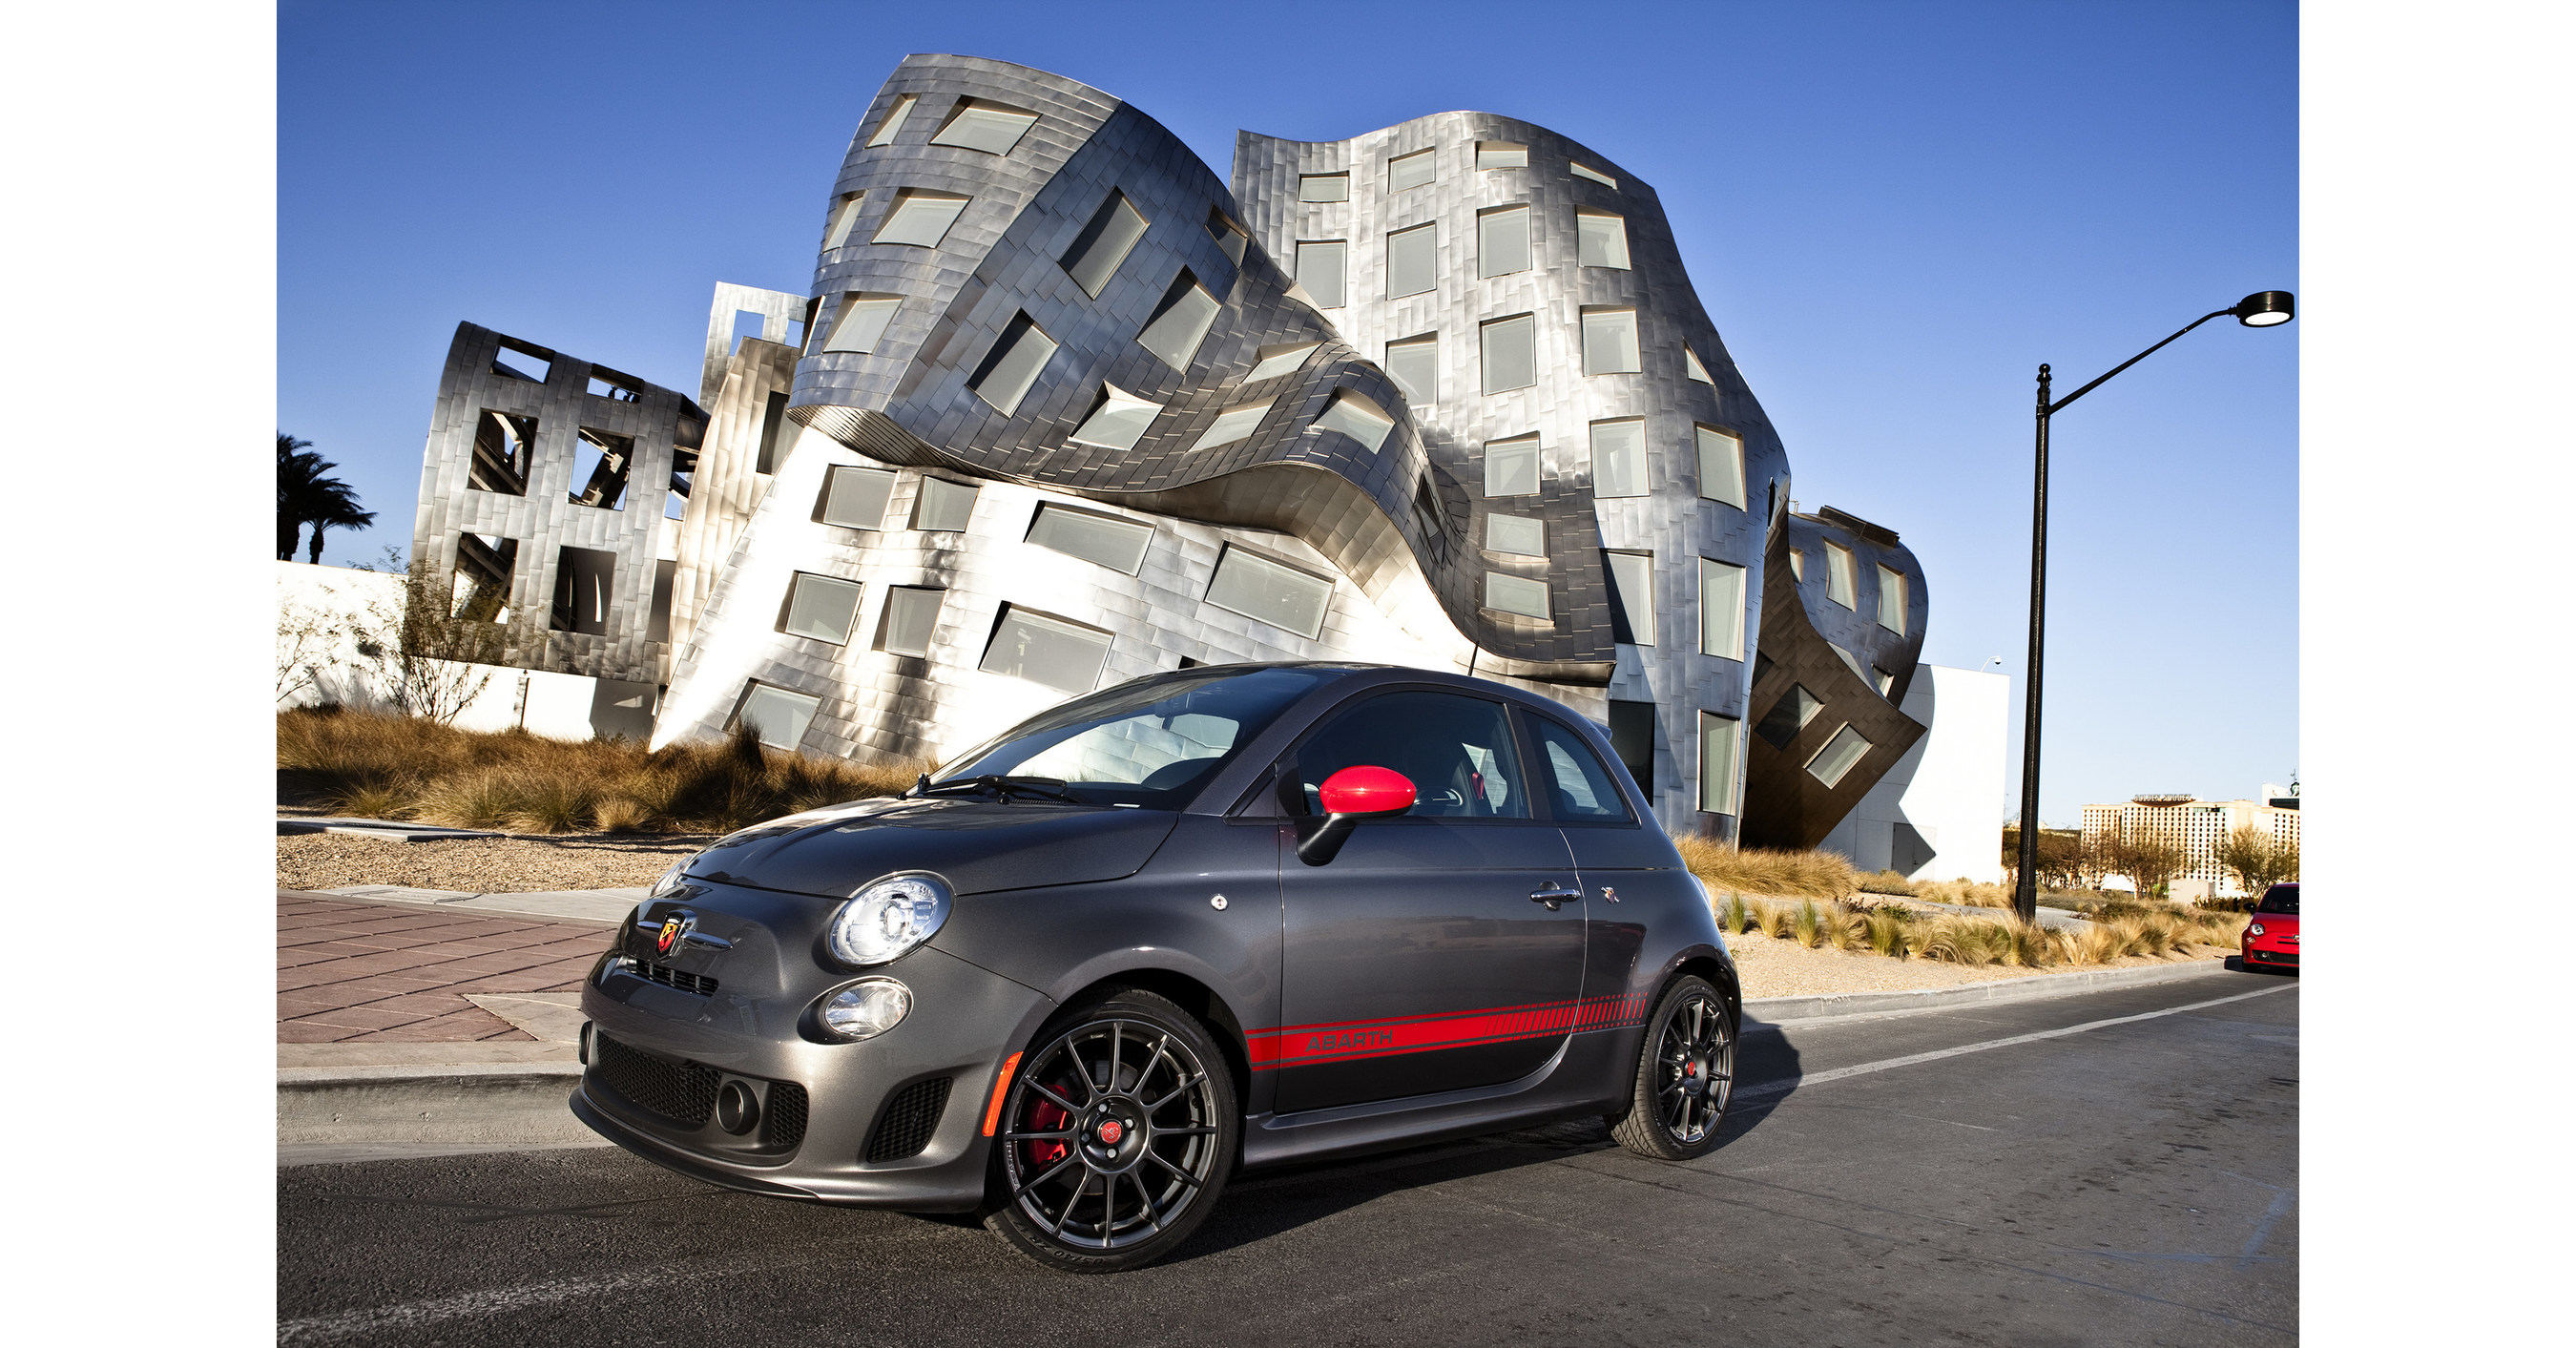 Hick journalist Van Fiat 500 Abarth Named One of 2018's 'Fastest Cars for the Money'